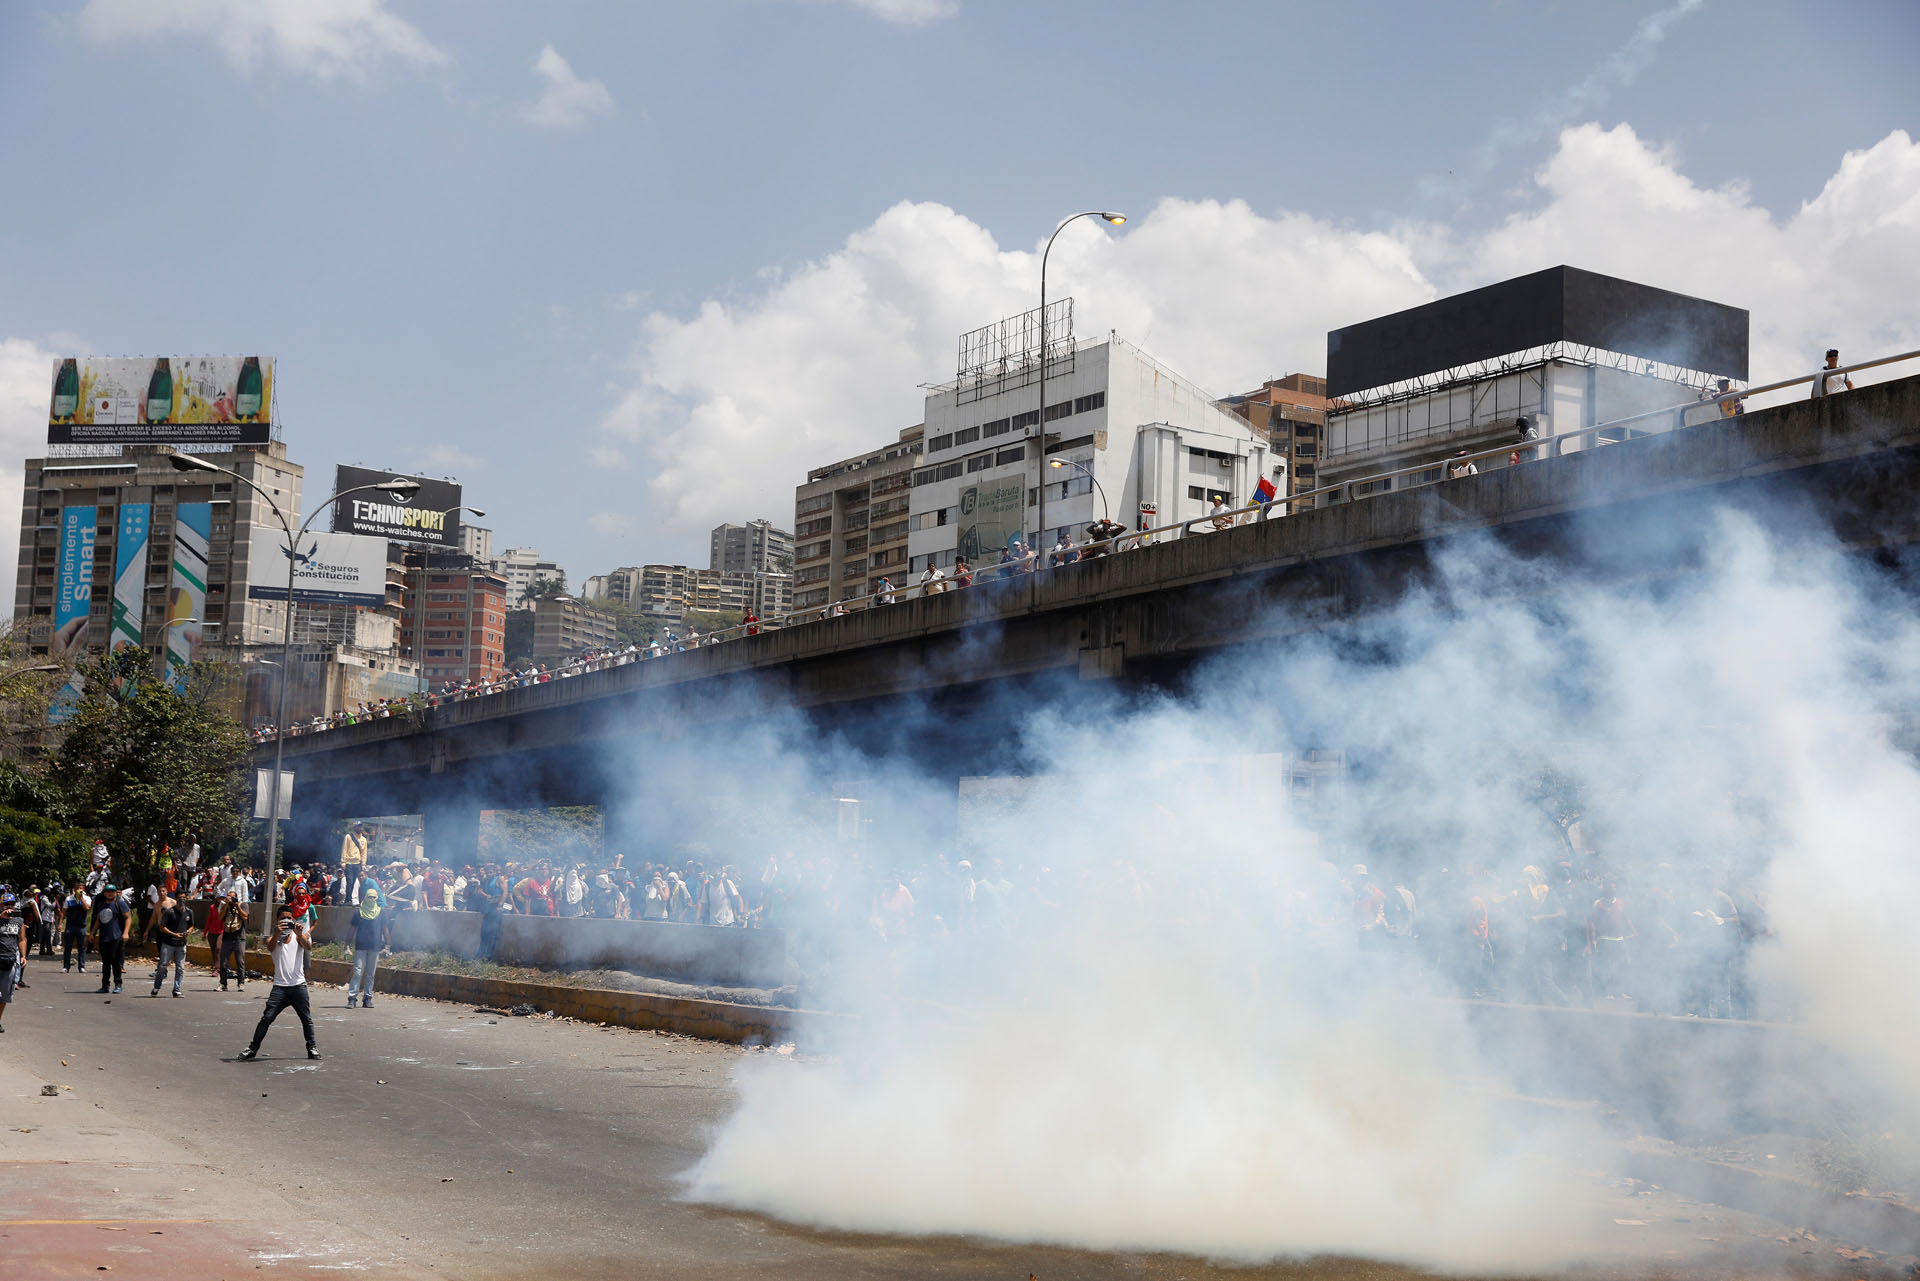 Demonstrators stay away from tear gas fired by security forces during an opposition rally in Caracas, Venezuela April 6, 2017. REUTERS/Carlos Garcia Rawlins